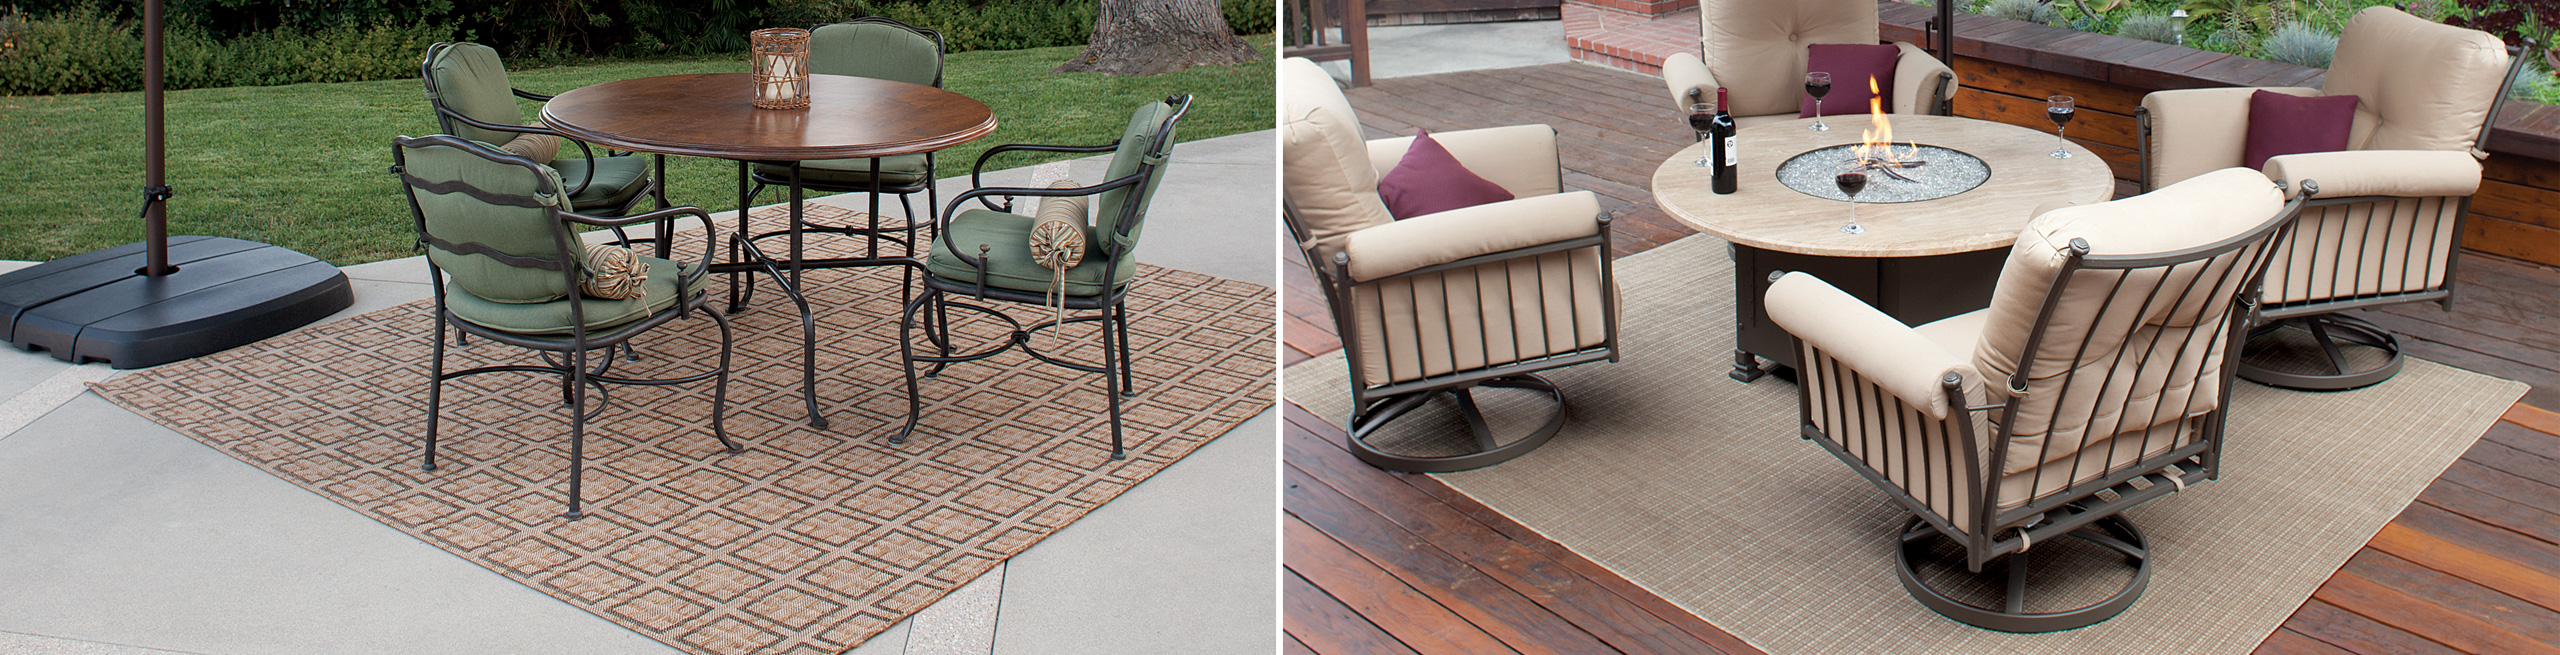 Contemporary Outdoor Rugs outdoor rugs for patios